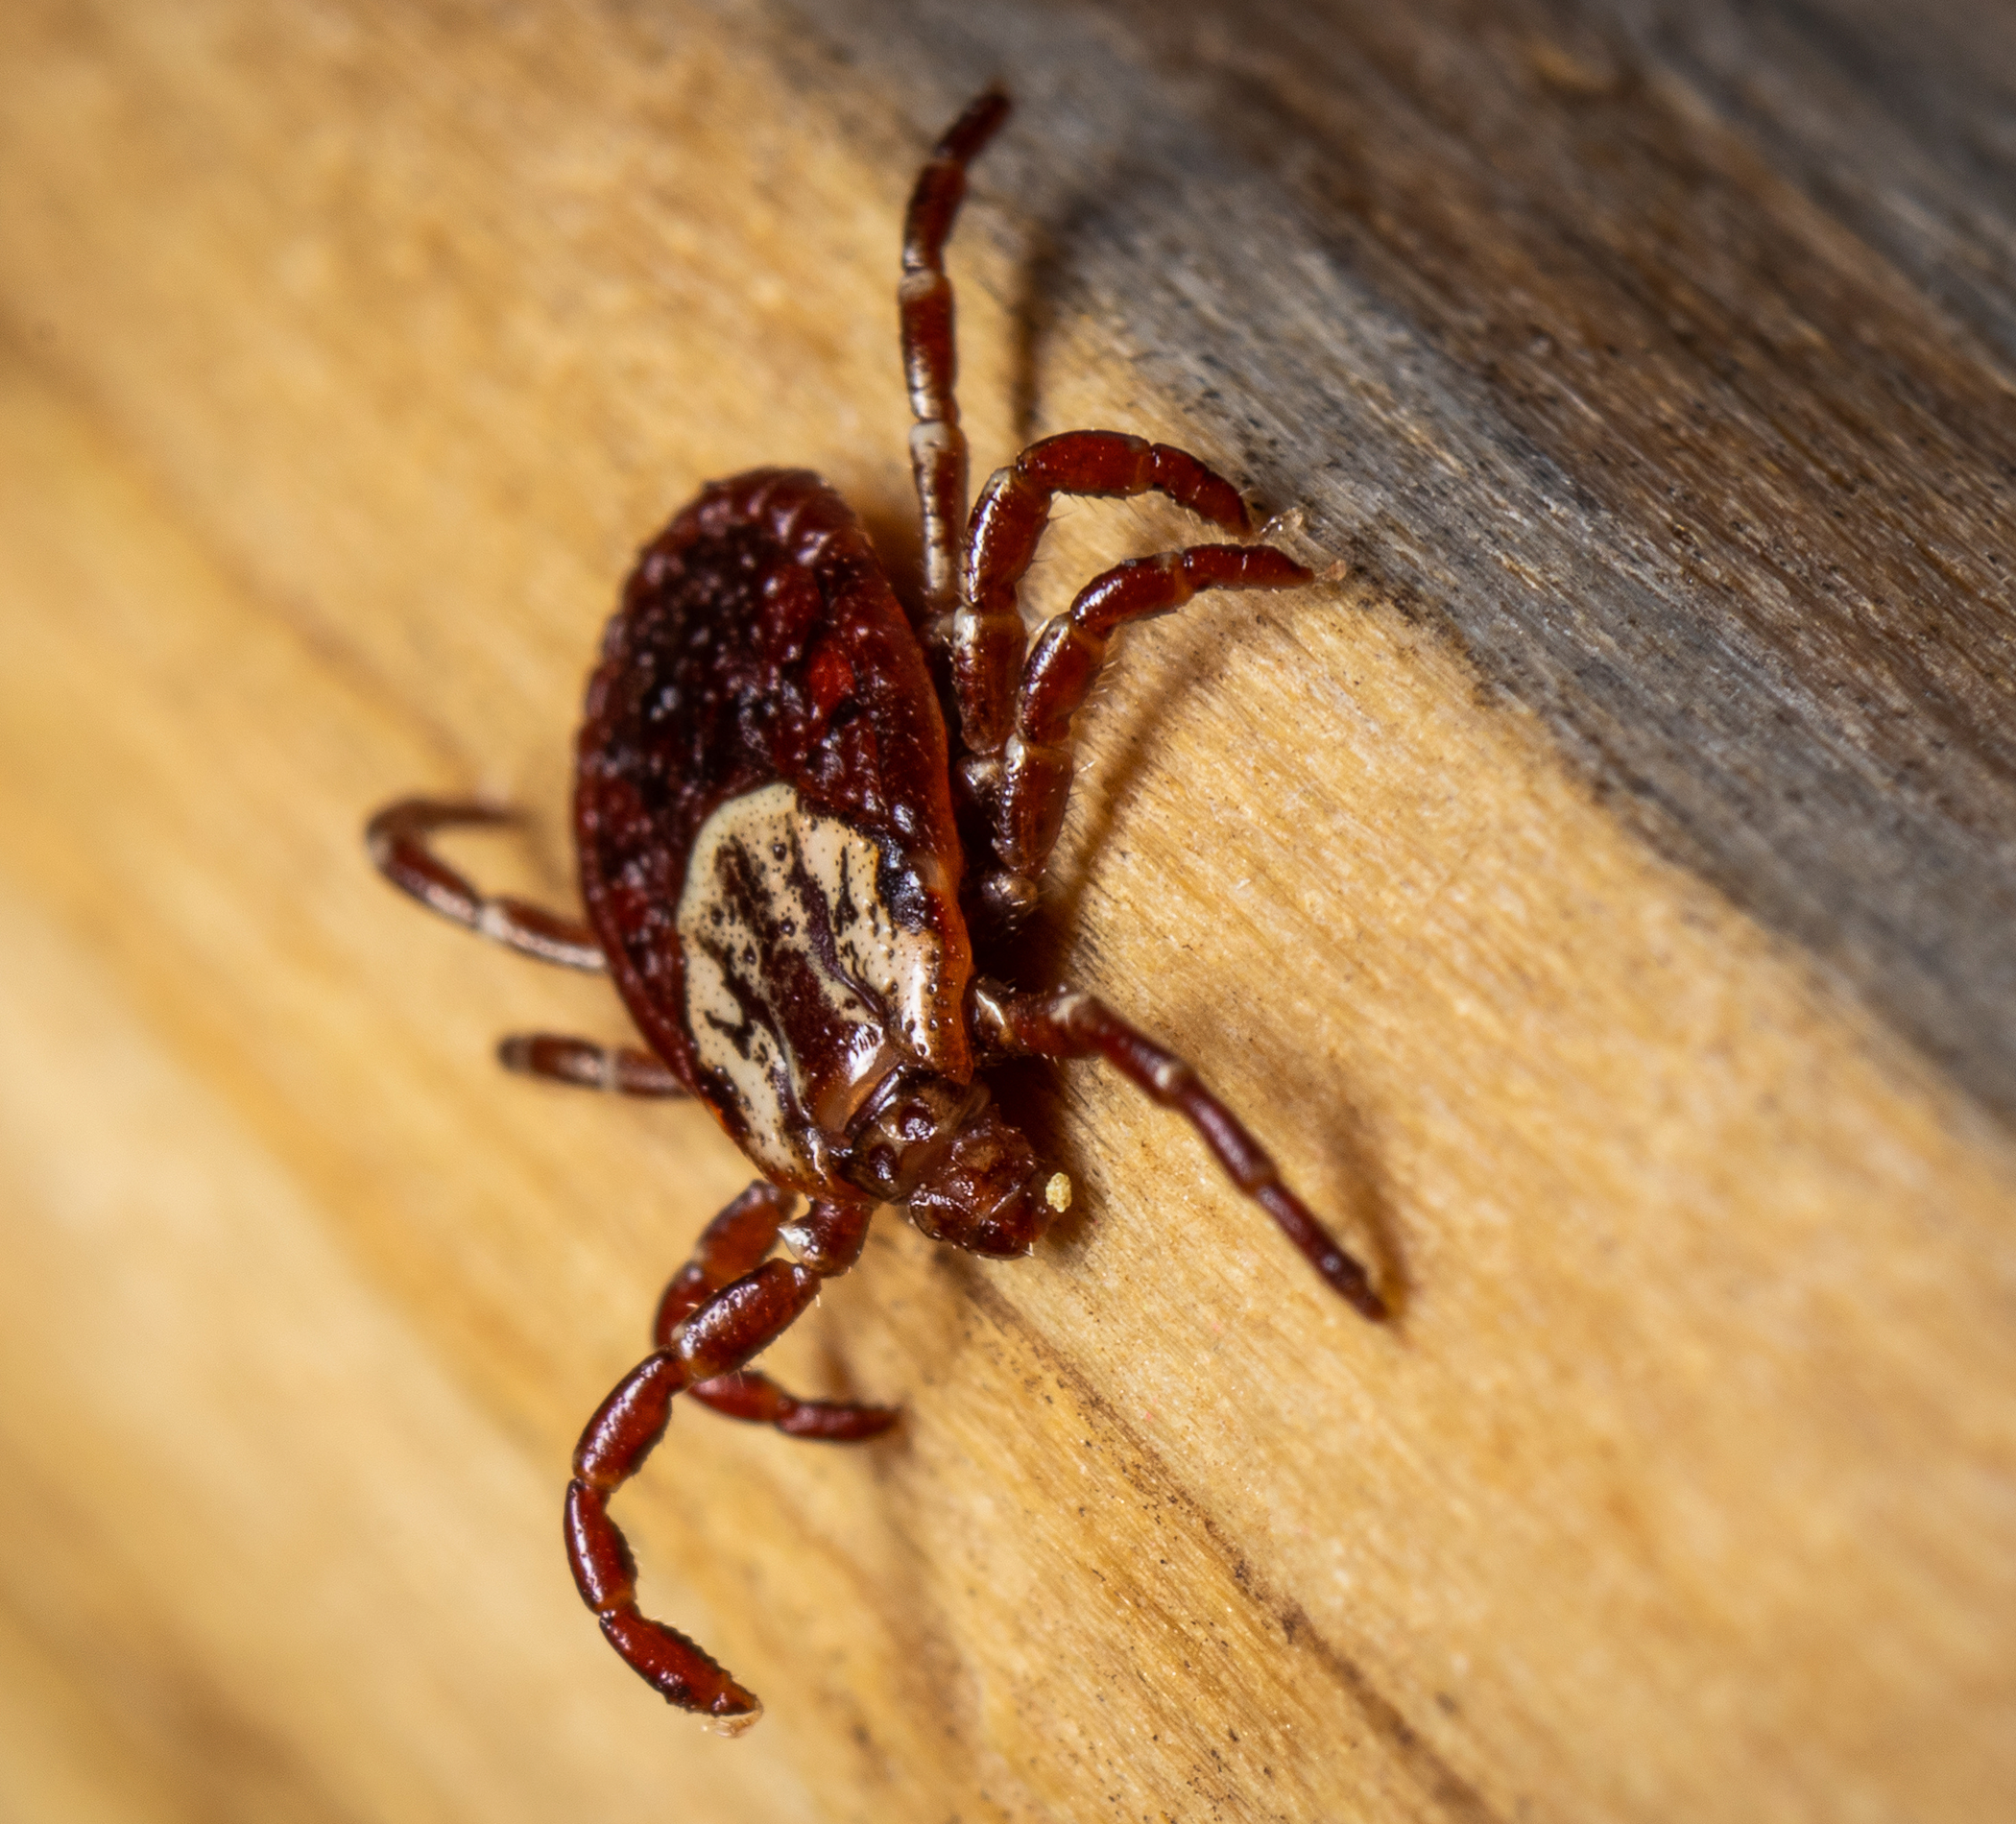 dog tick crawling on the wooden material